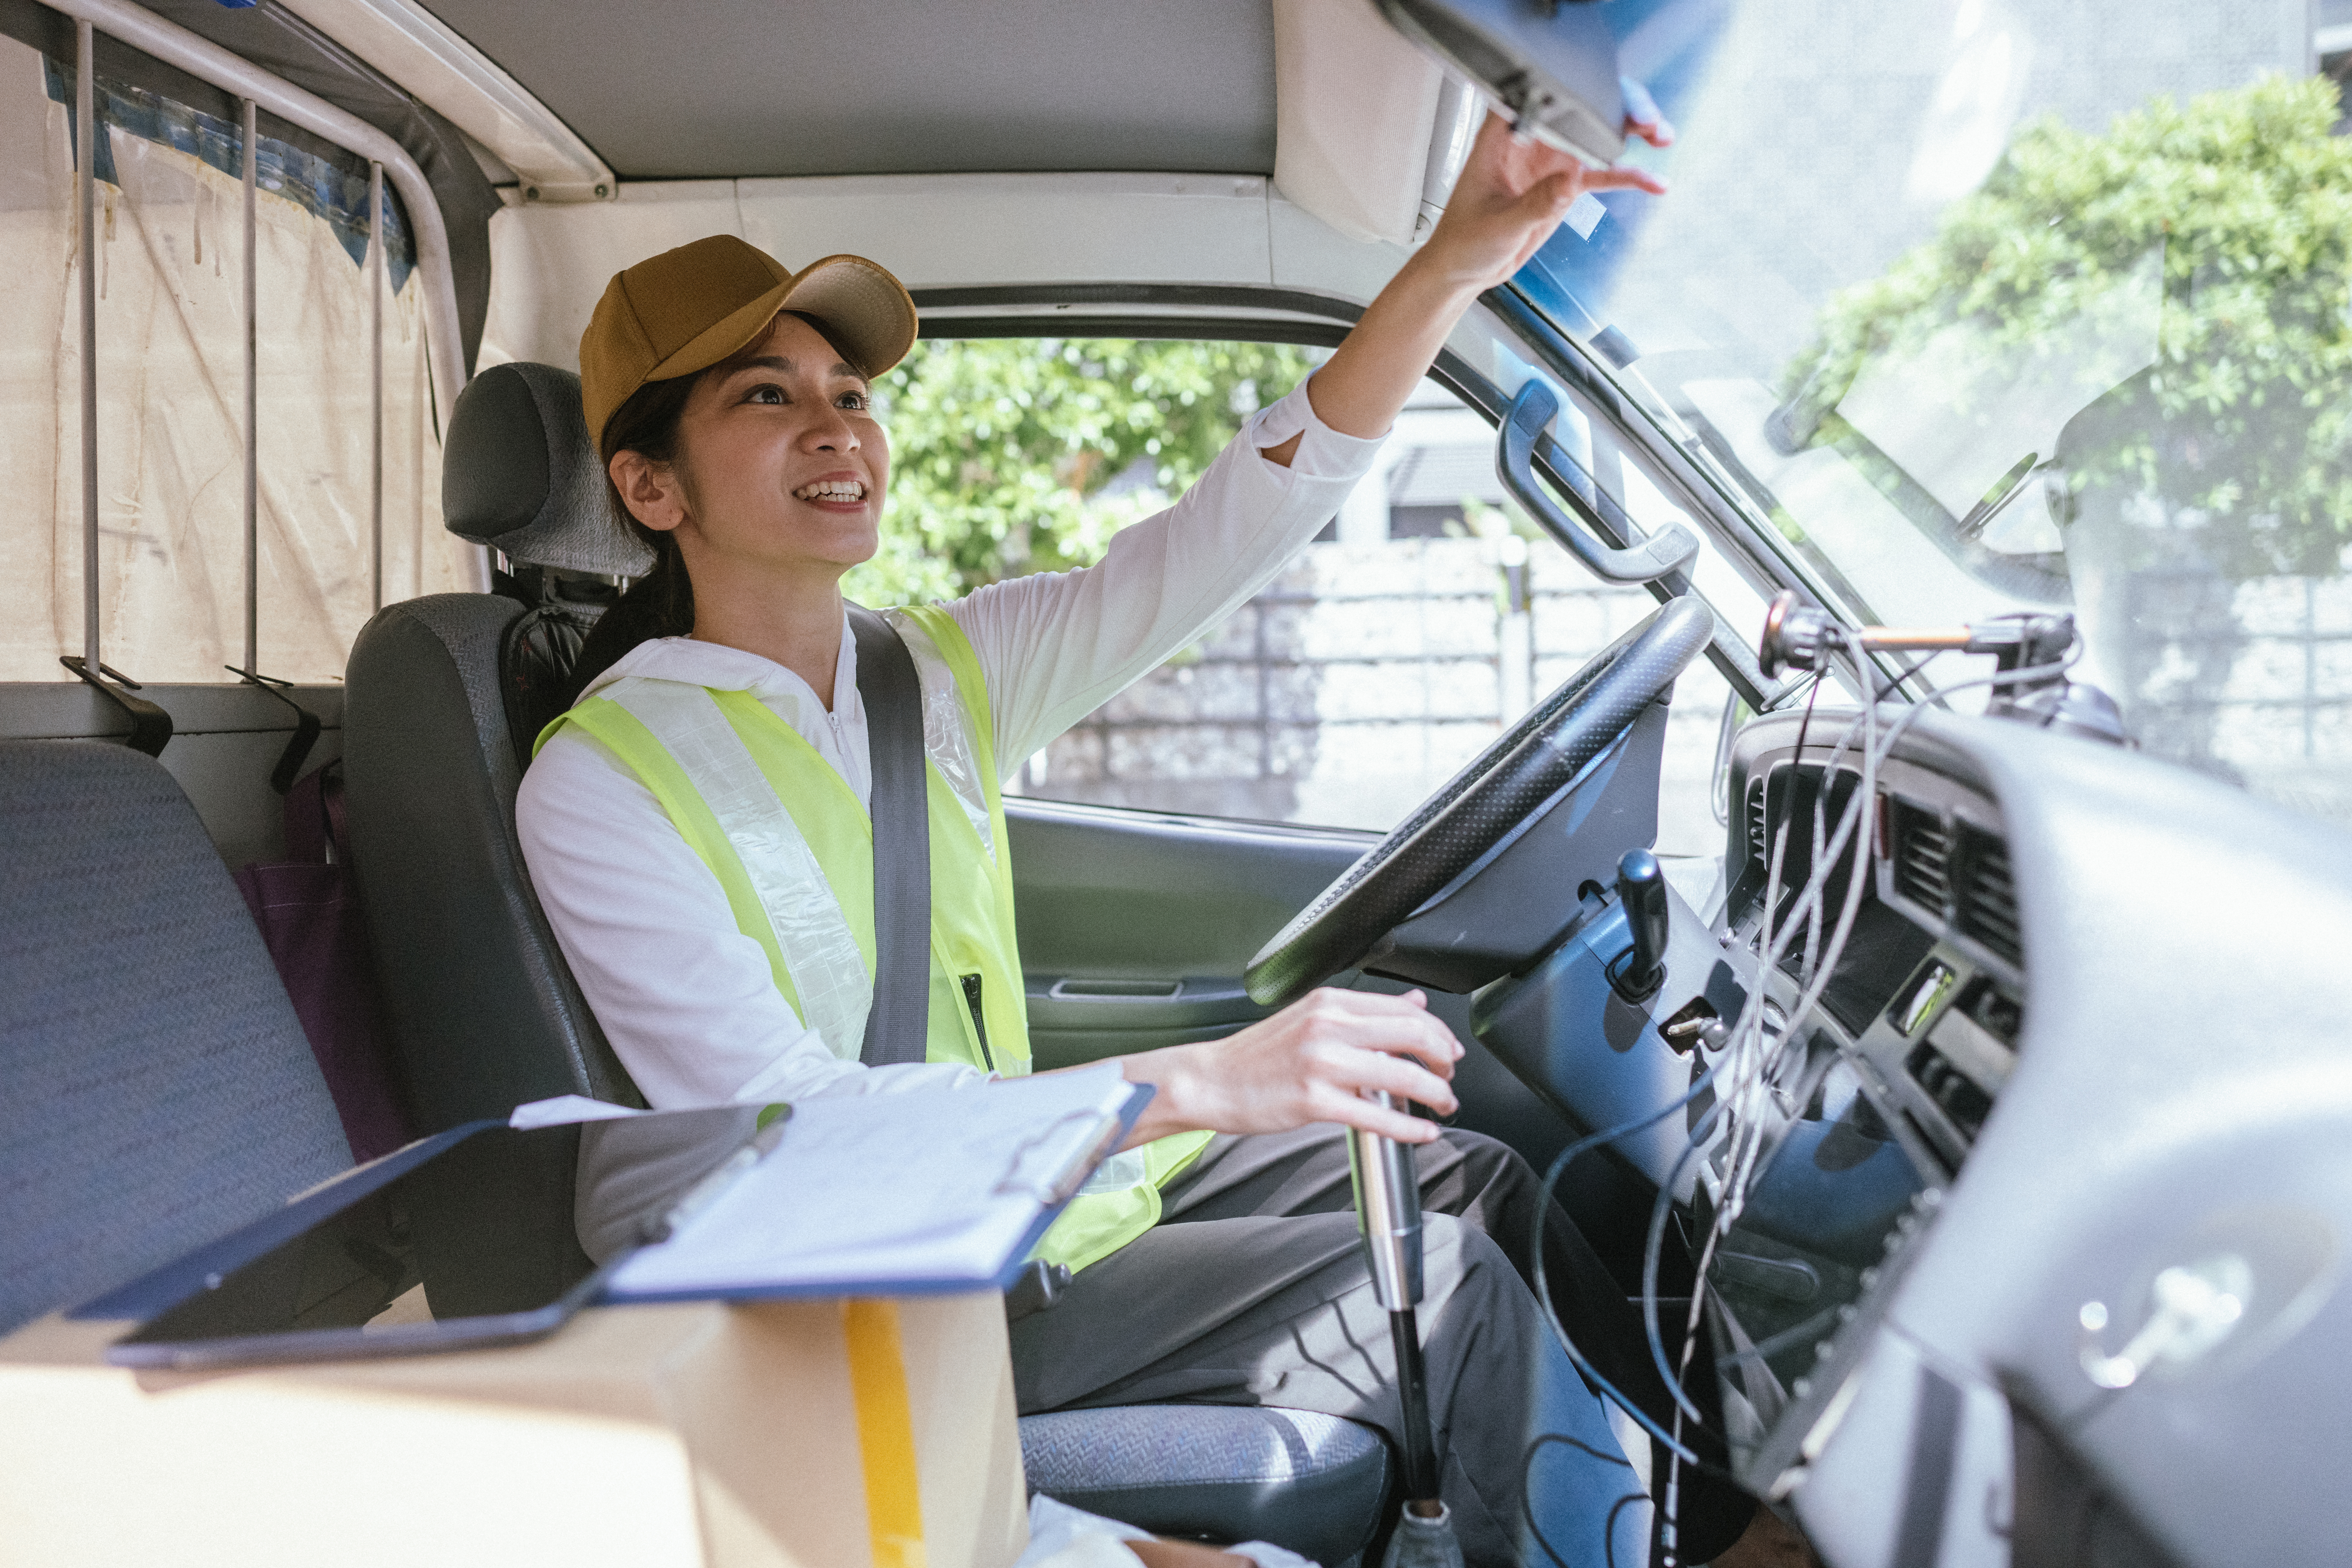 How to Hire the Best Courier & Same Day Delivery Drivers : Part I